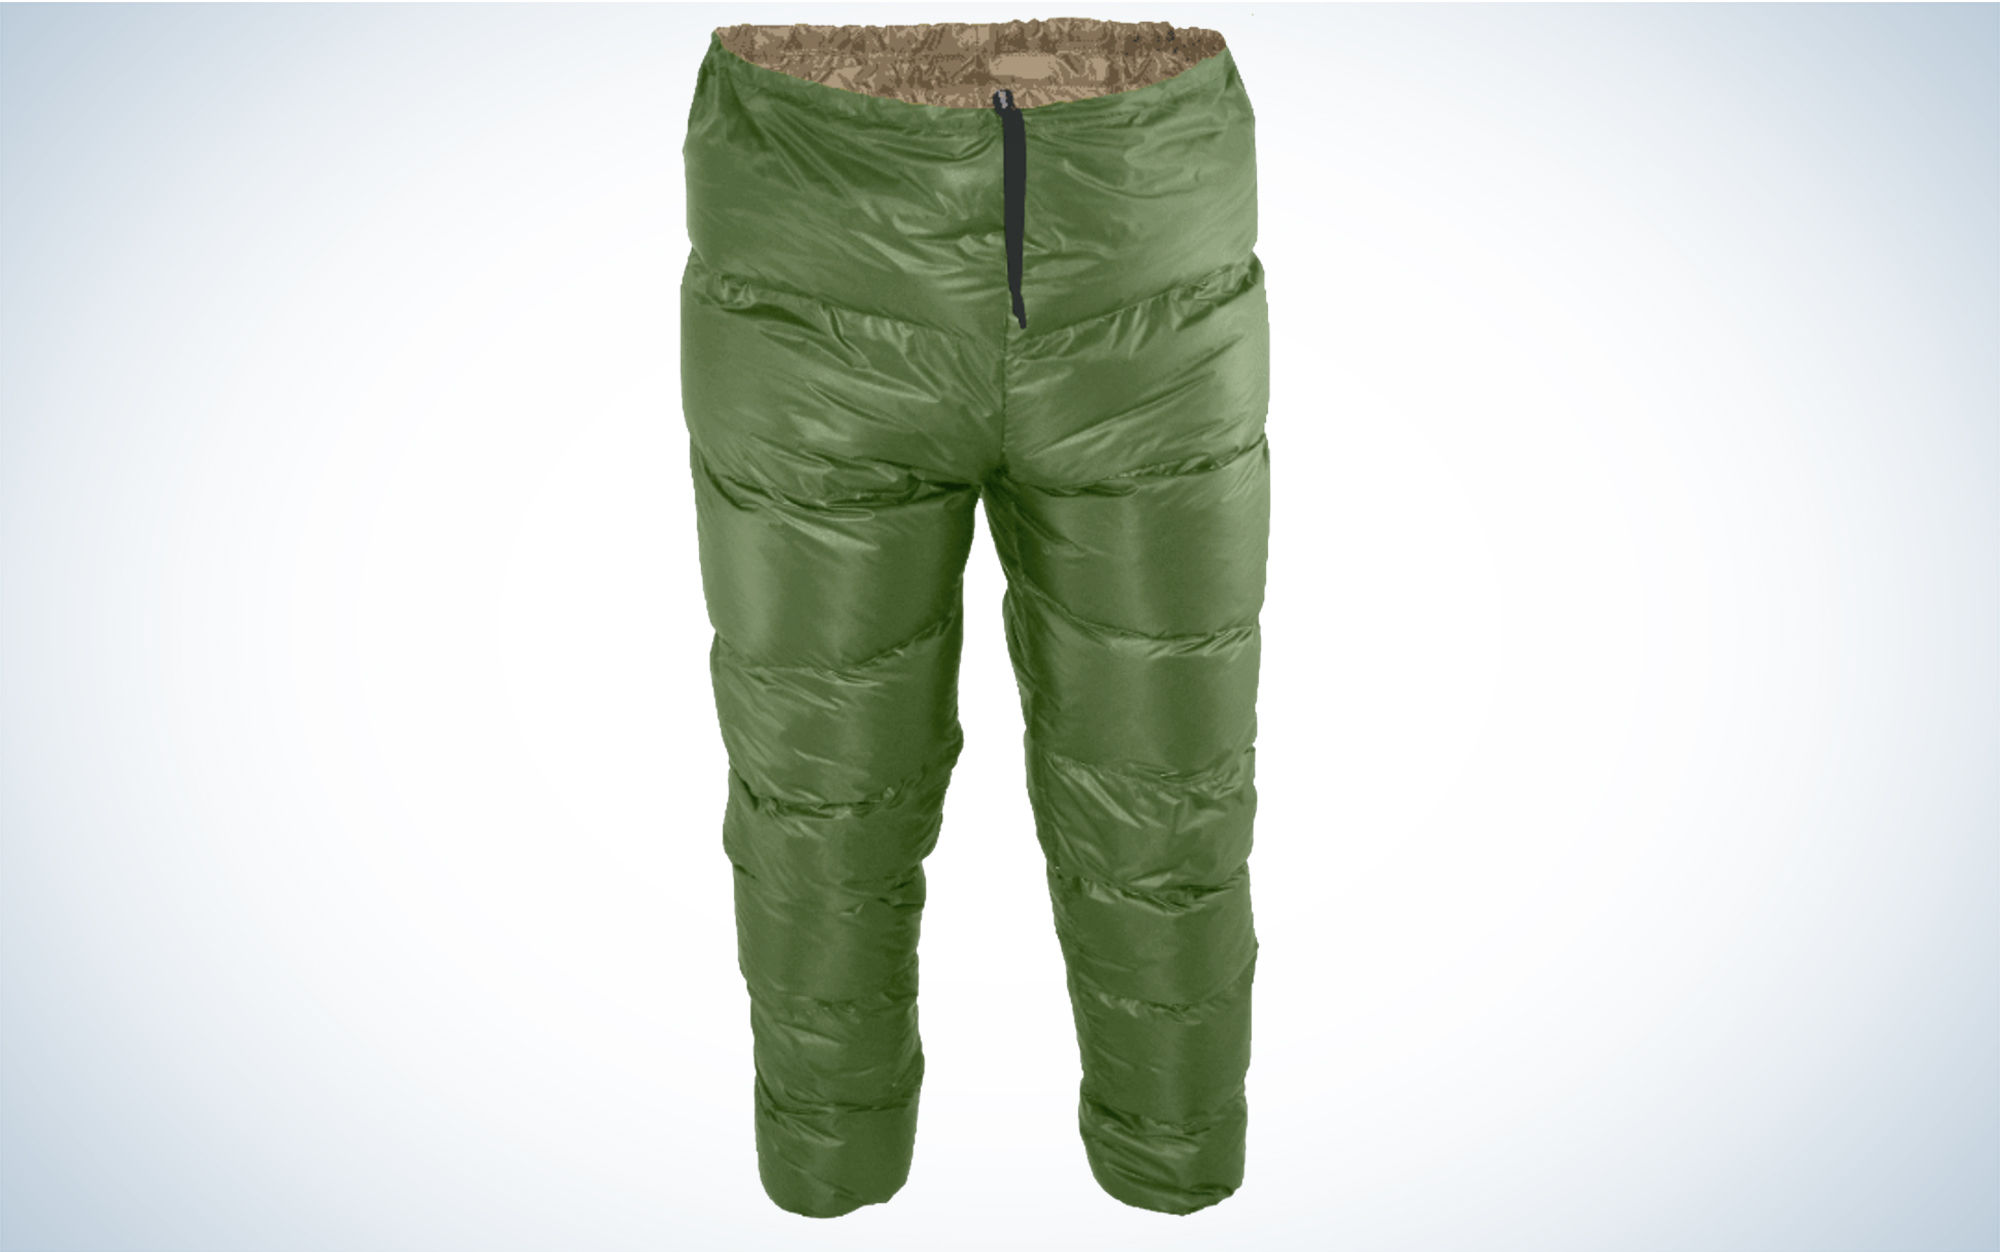 The Goosefeet Gear Down Pants are the most customizable.